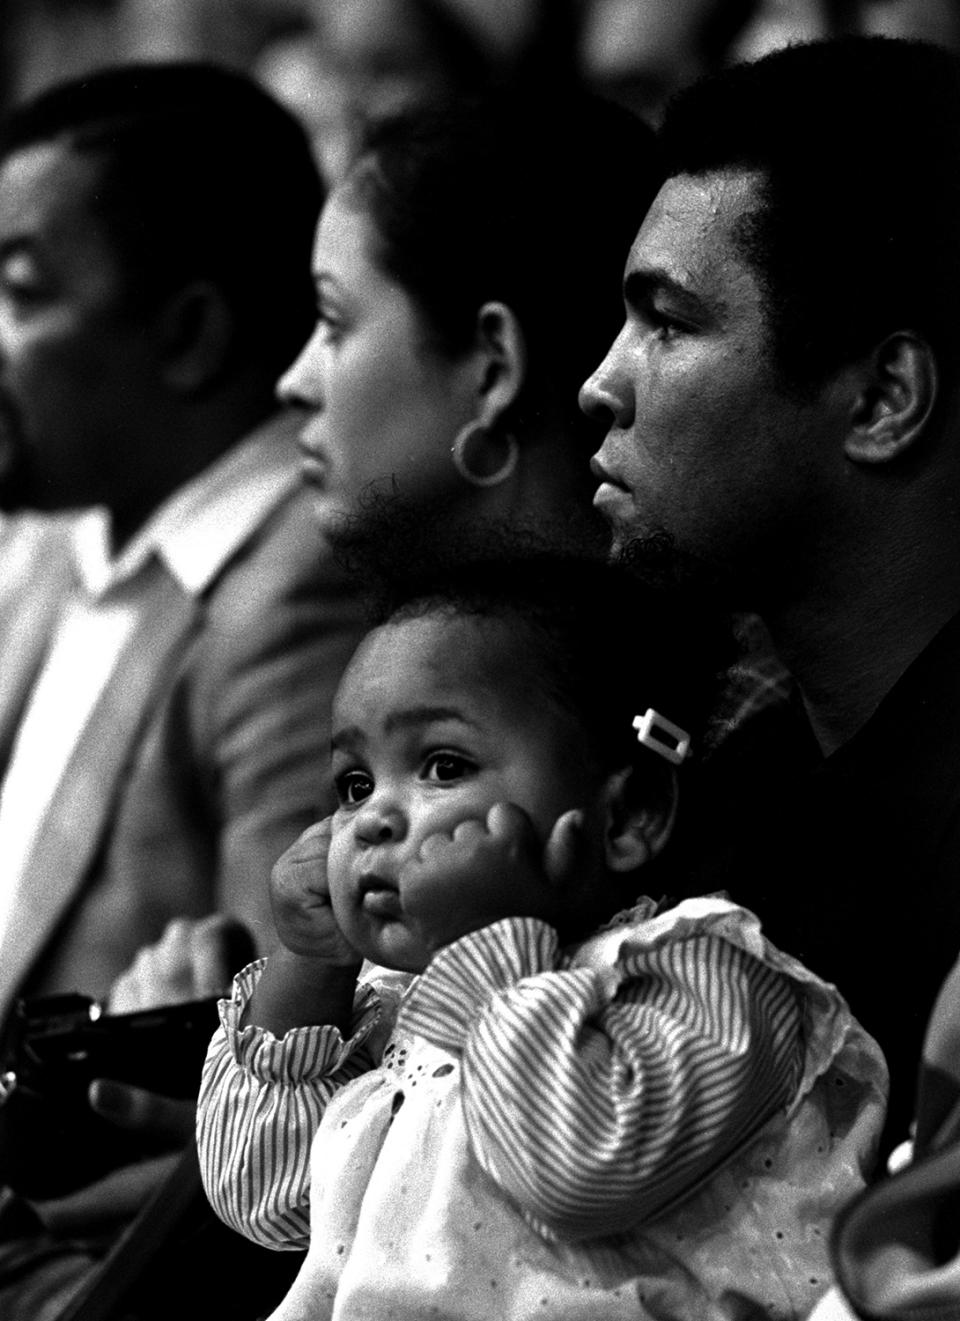 <p>15-month-old Hana Ali is shown watching the attractions of the Ringling Bros. Barnum and Bailey Circus on Miami Beach, January 19, 1977, held in the arms of her father, world heavyweight champion Muhammad Ali. Mother Veronica is close by, left, but young Hana seems to have here eyes on a different ring from her parents. (AP Photo/stf) </p>